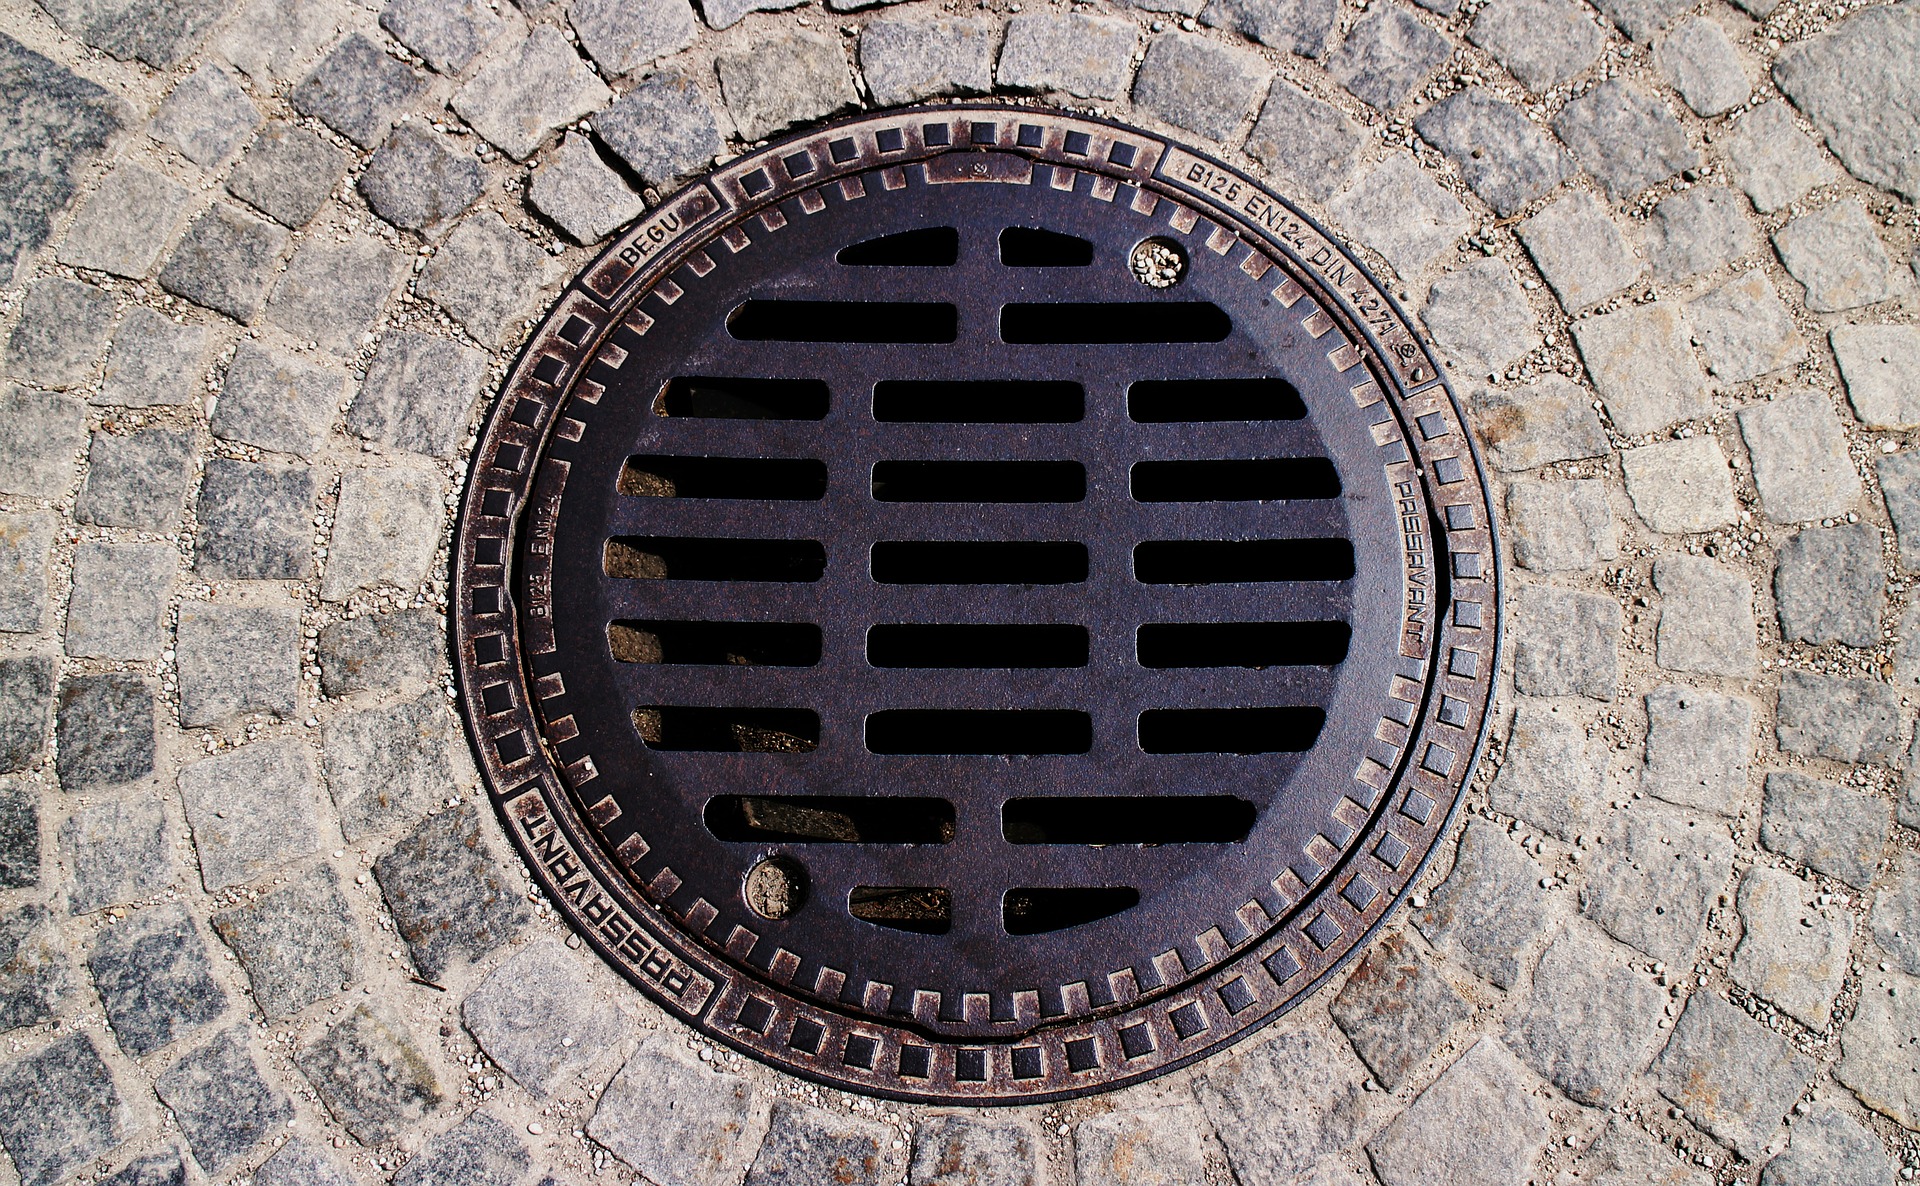 Fixing Europe’s smelly problem: sewage systems are adapted for climate change